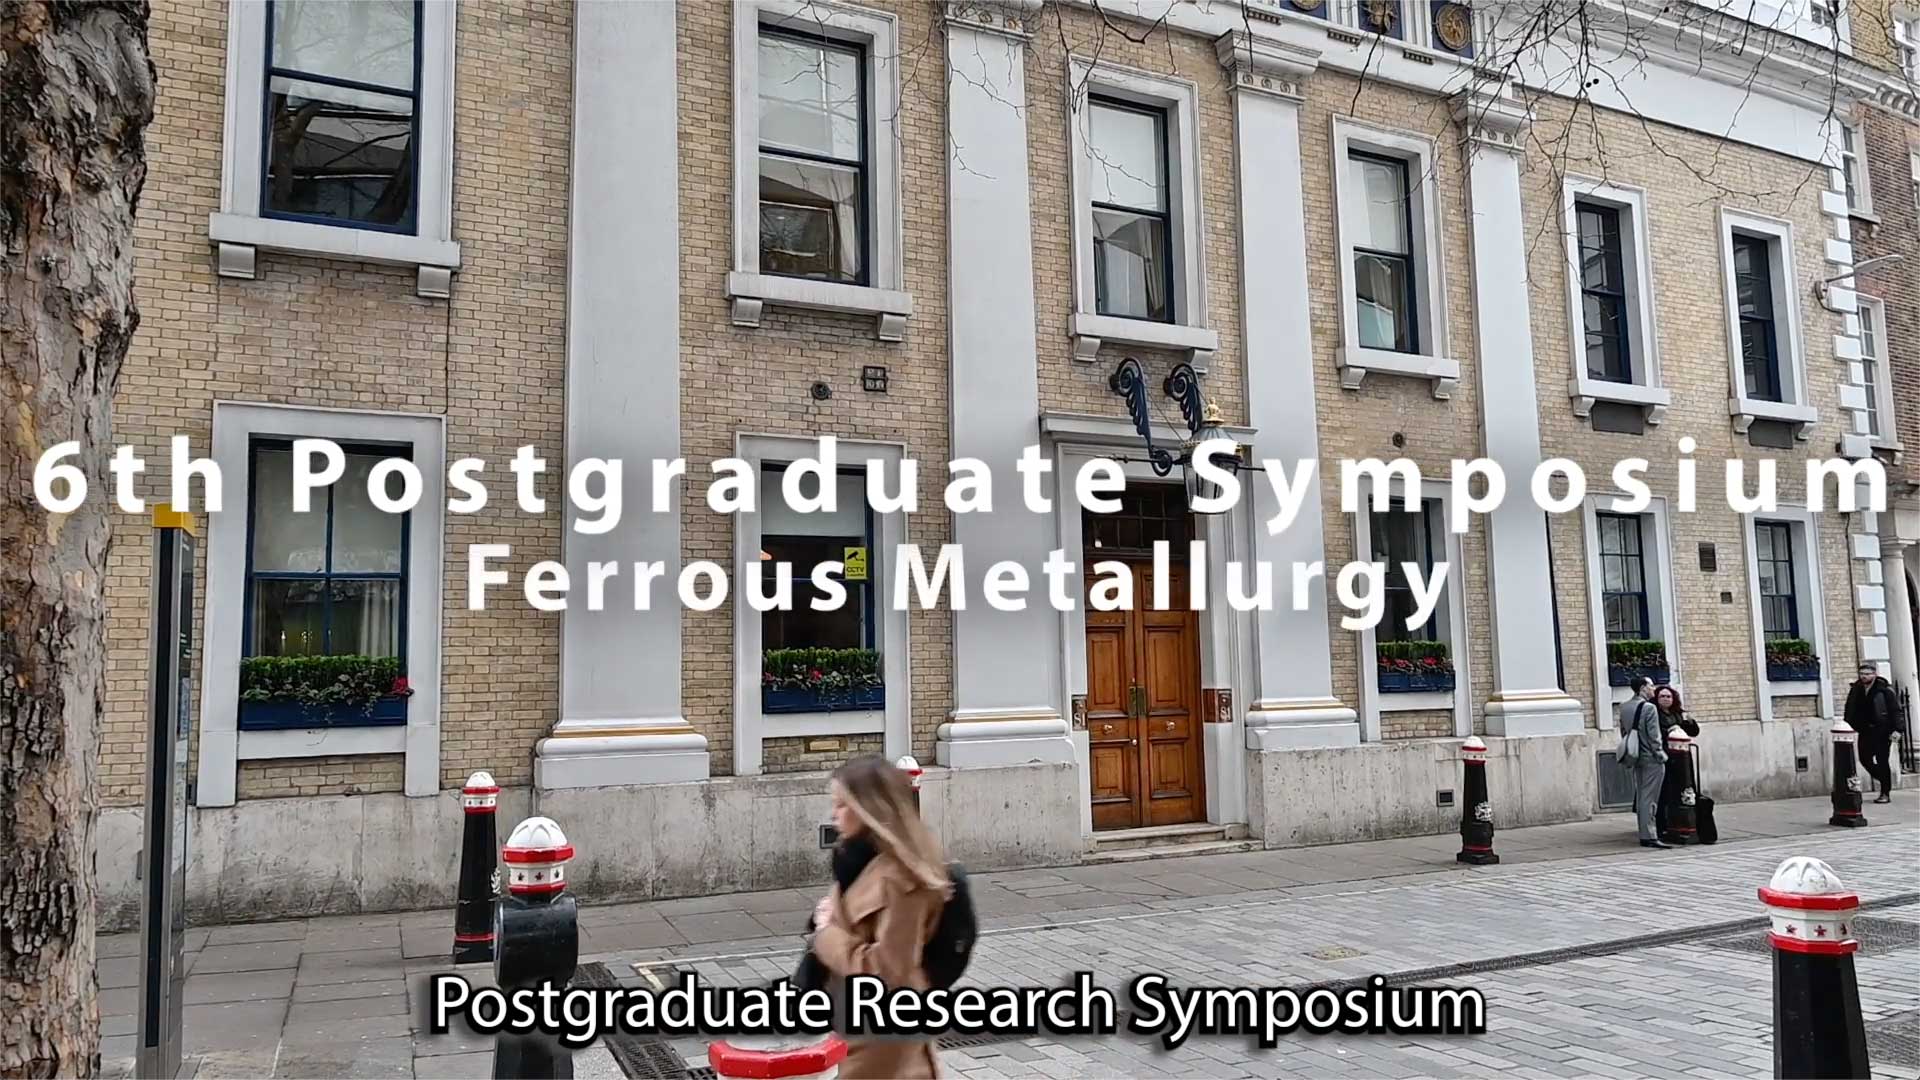 The 6th Postgraduate Research Symposium on Ferrous Metallurgy 2023 at the Armourers’ Hall, Armourers & Brasiers’ Company, London